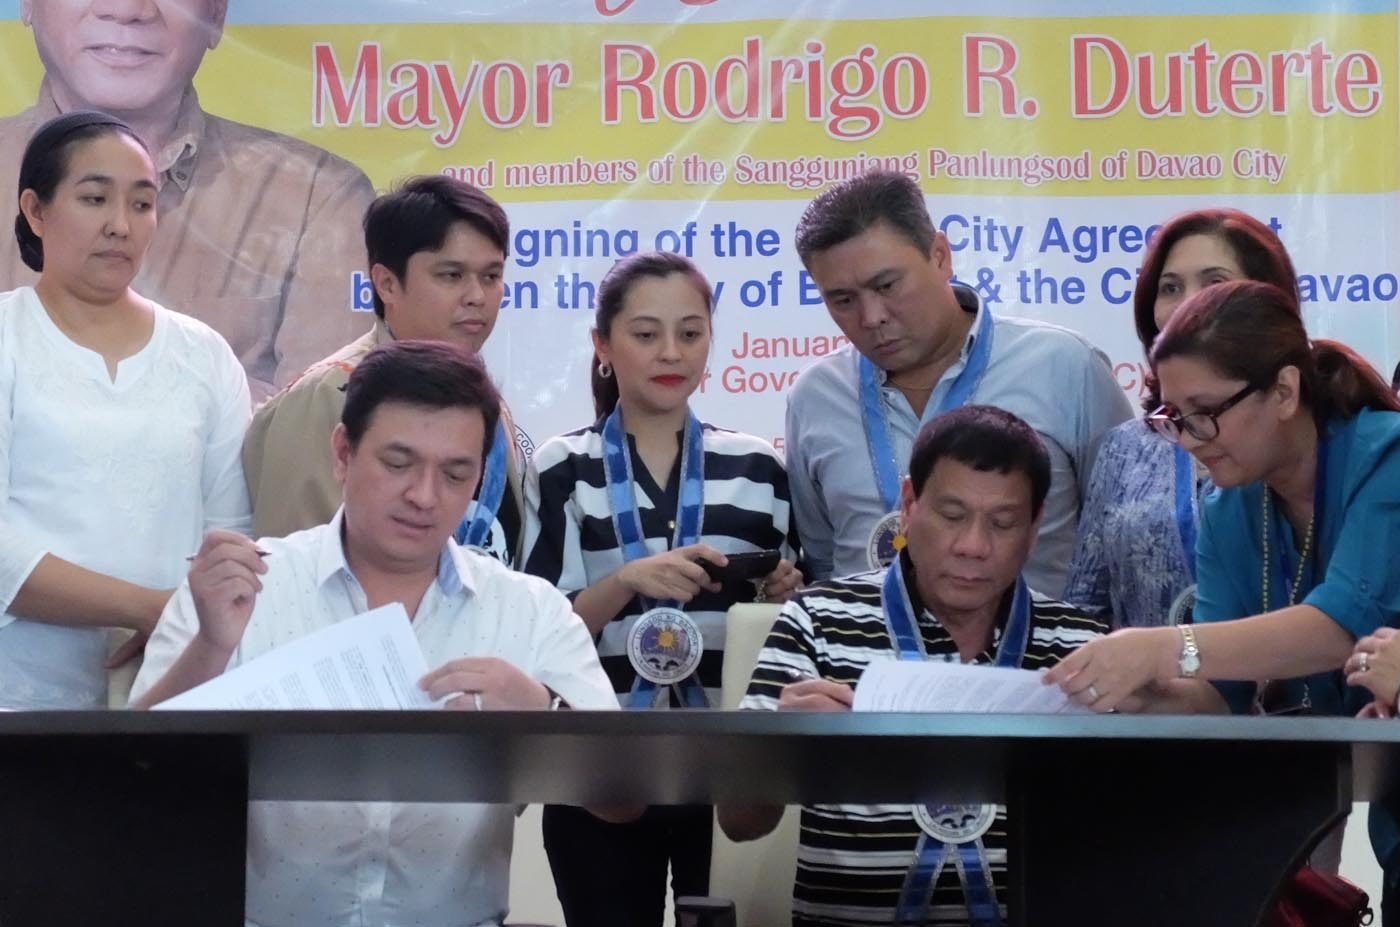 Duterte signs sister city agreement between Davao City and Bacoor